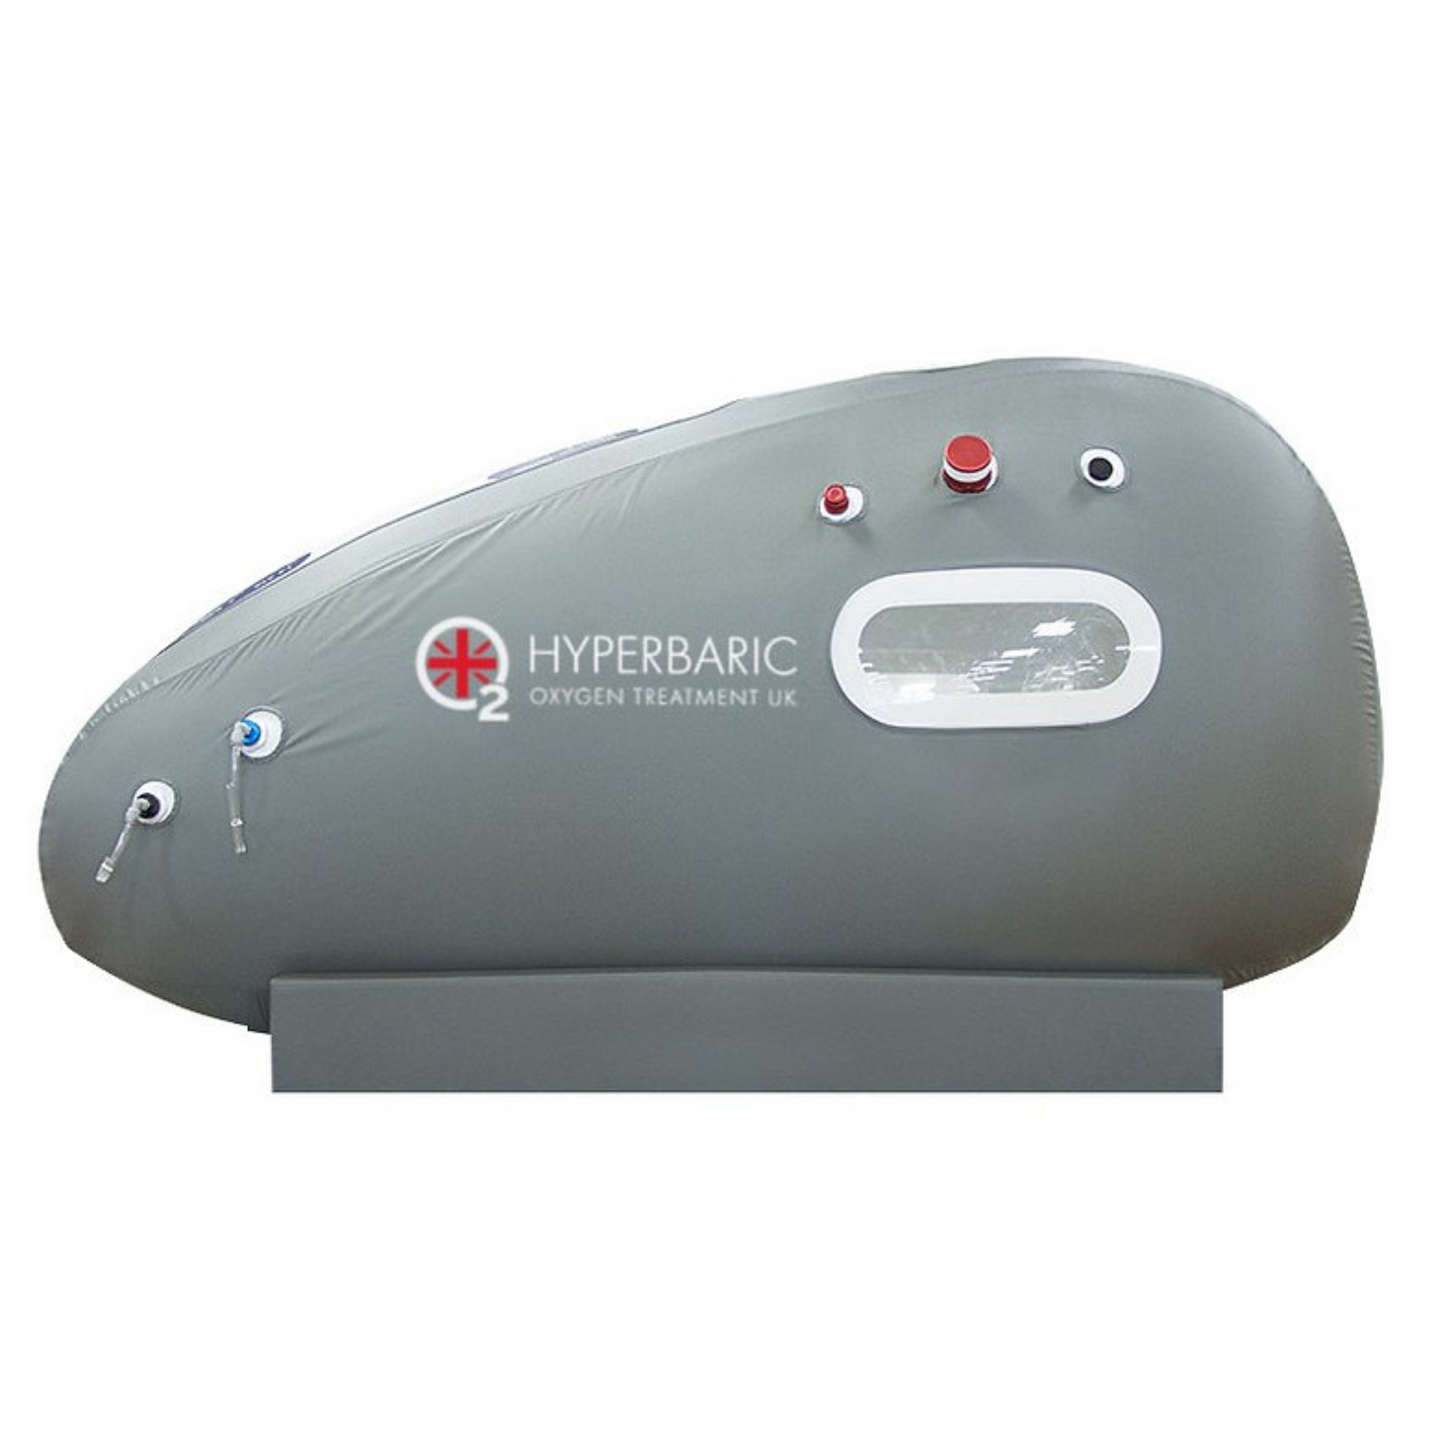 Hyperbaric Oxygen Chamber 1.5 ATA Sit or Lie Down Model XXL - Relax